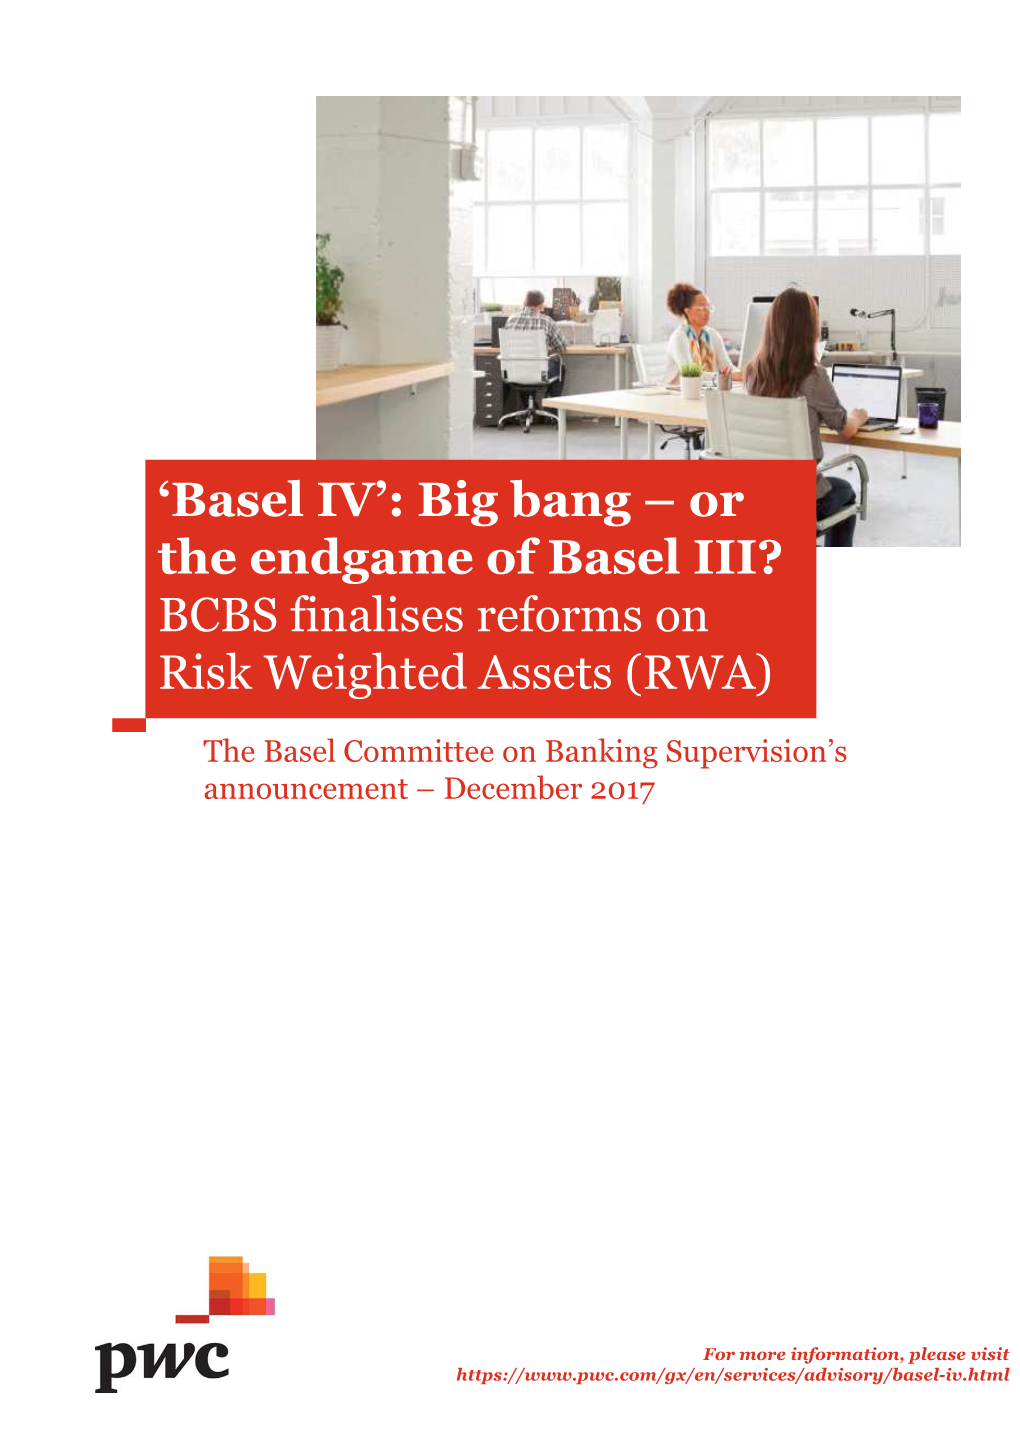 Big Bang – Or the Endgame of Basel III? BCBS Finalises Reforms on Risk Weighted Assets (RWA)